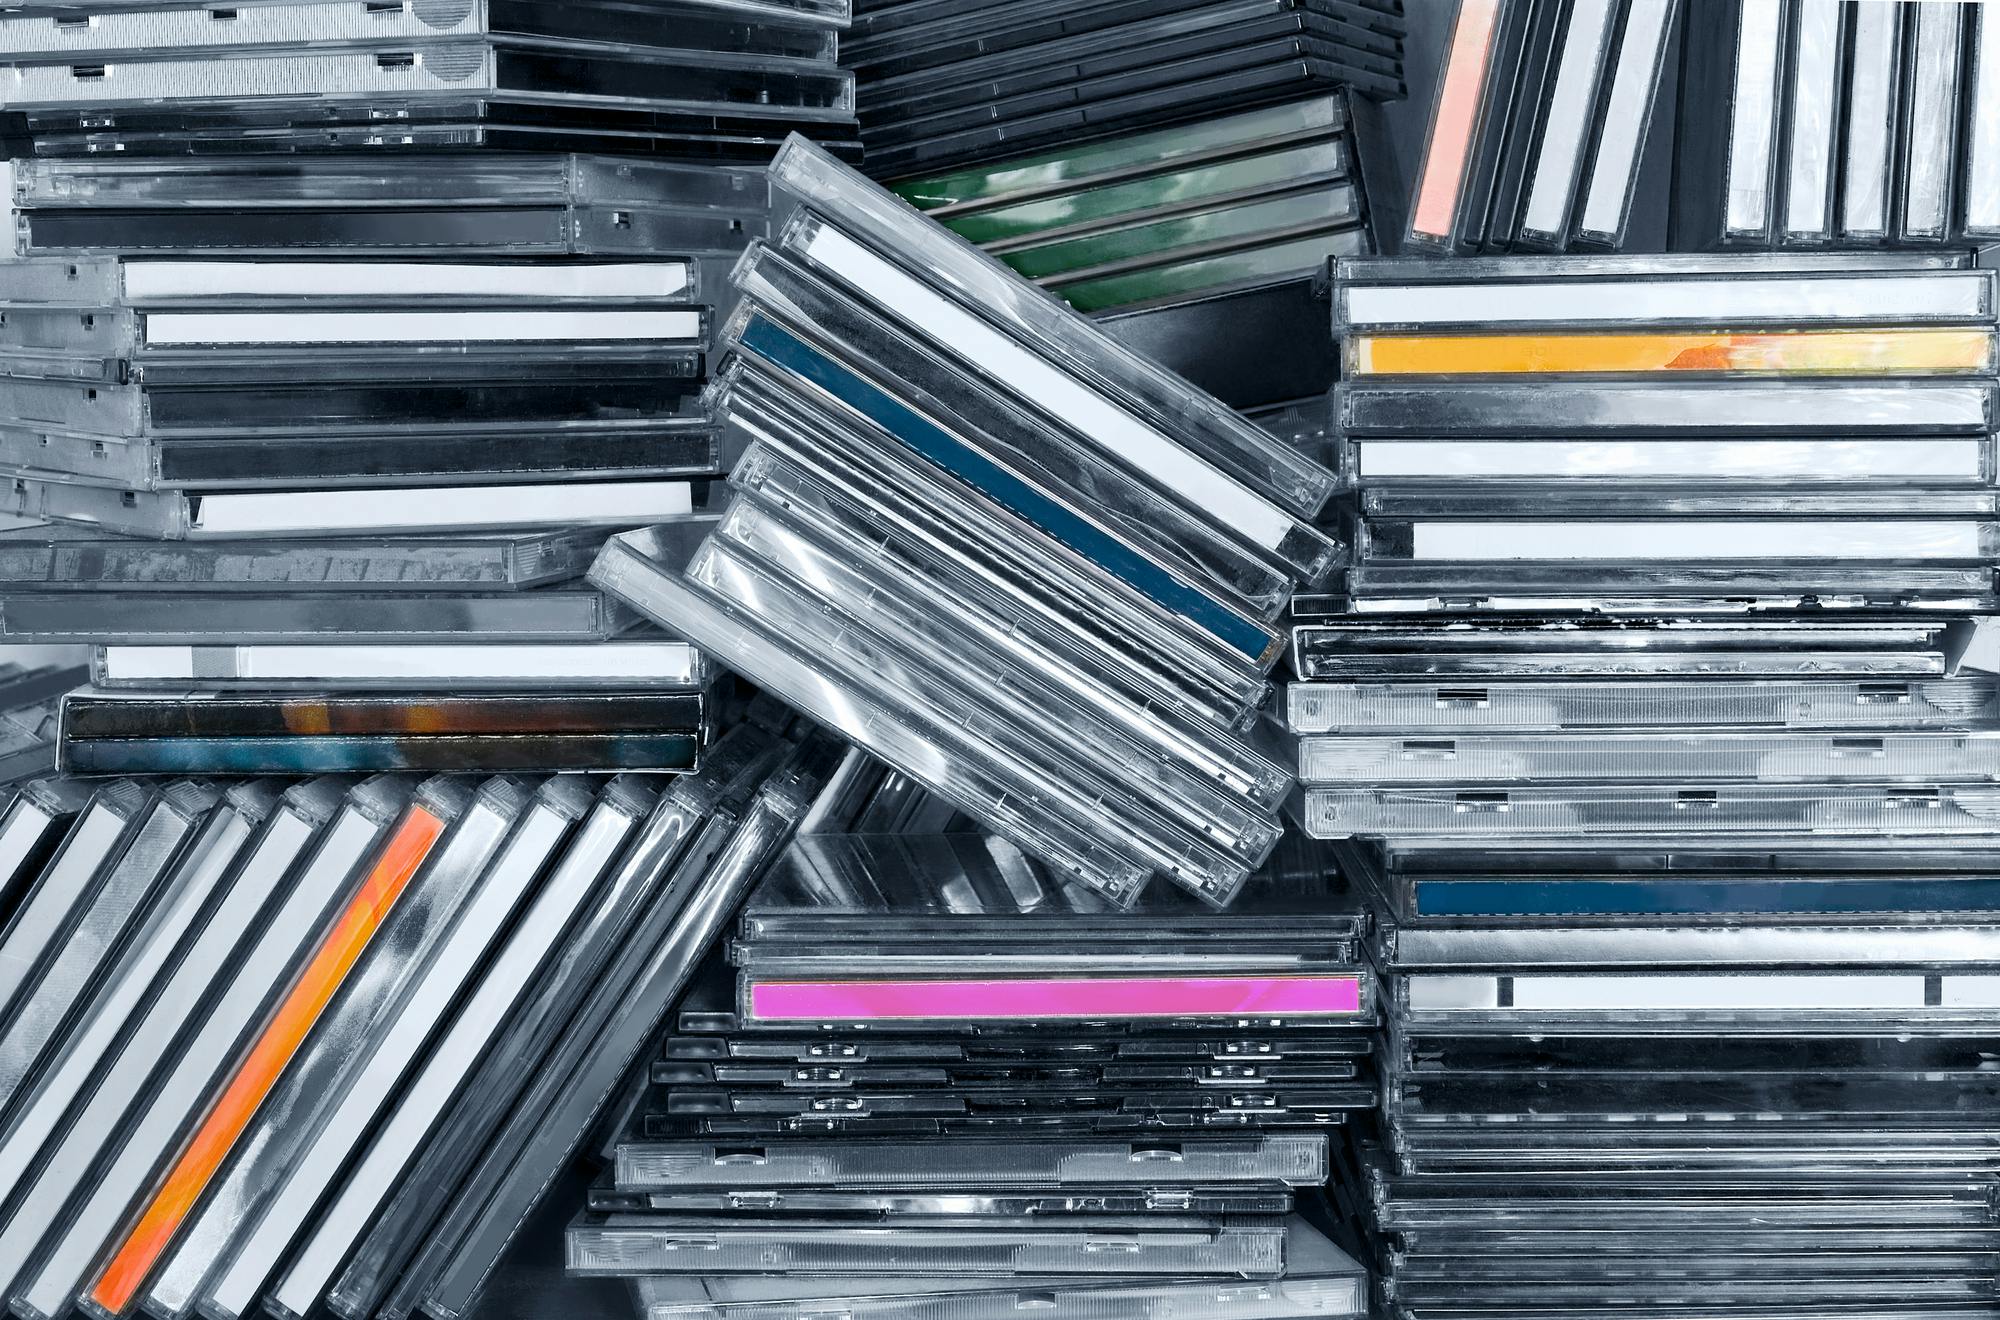 Quarantine cleaning: What to do with all those old CDs collecting dust? |  Star Tribune